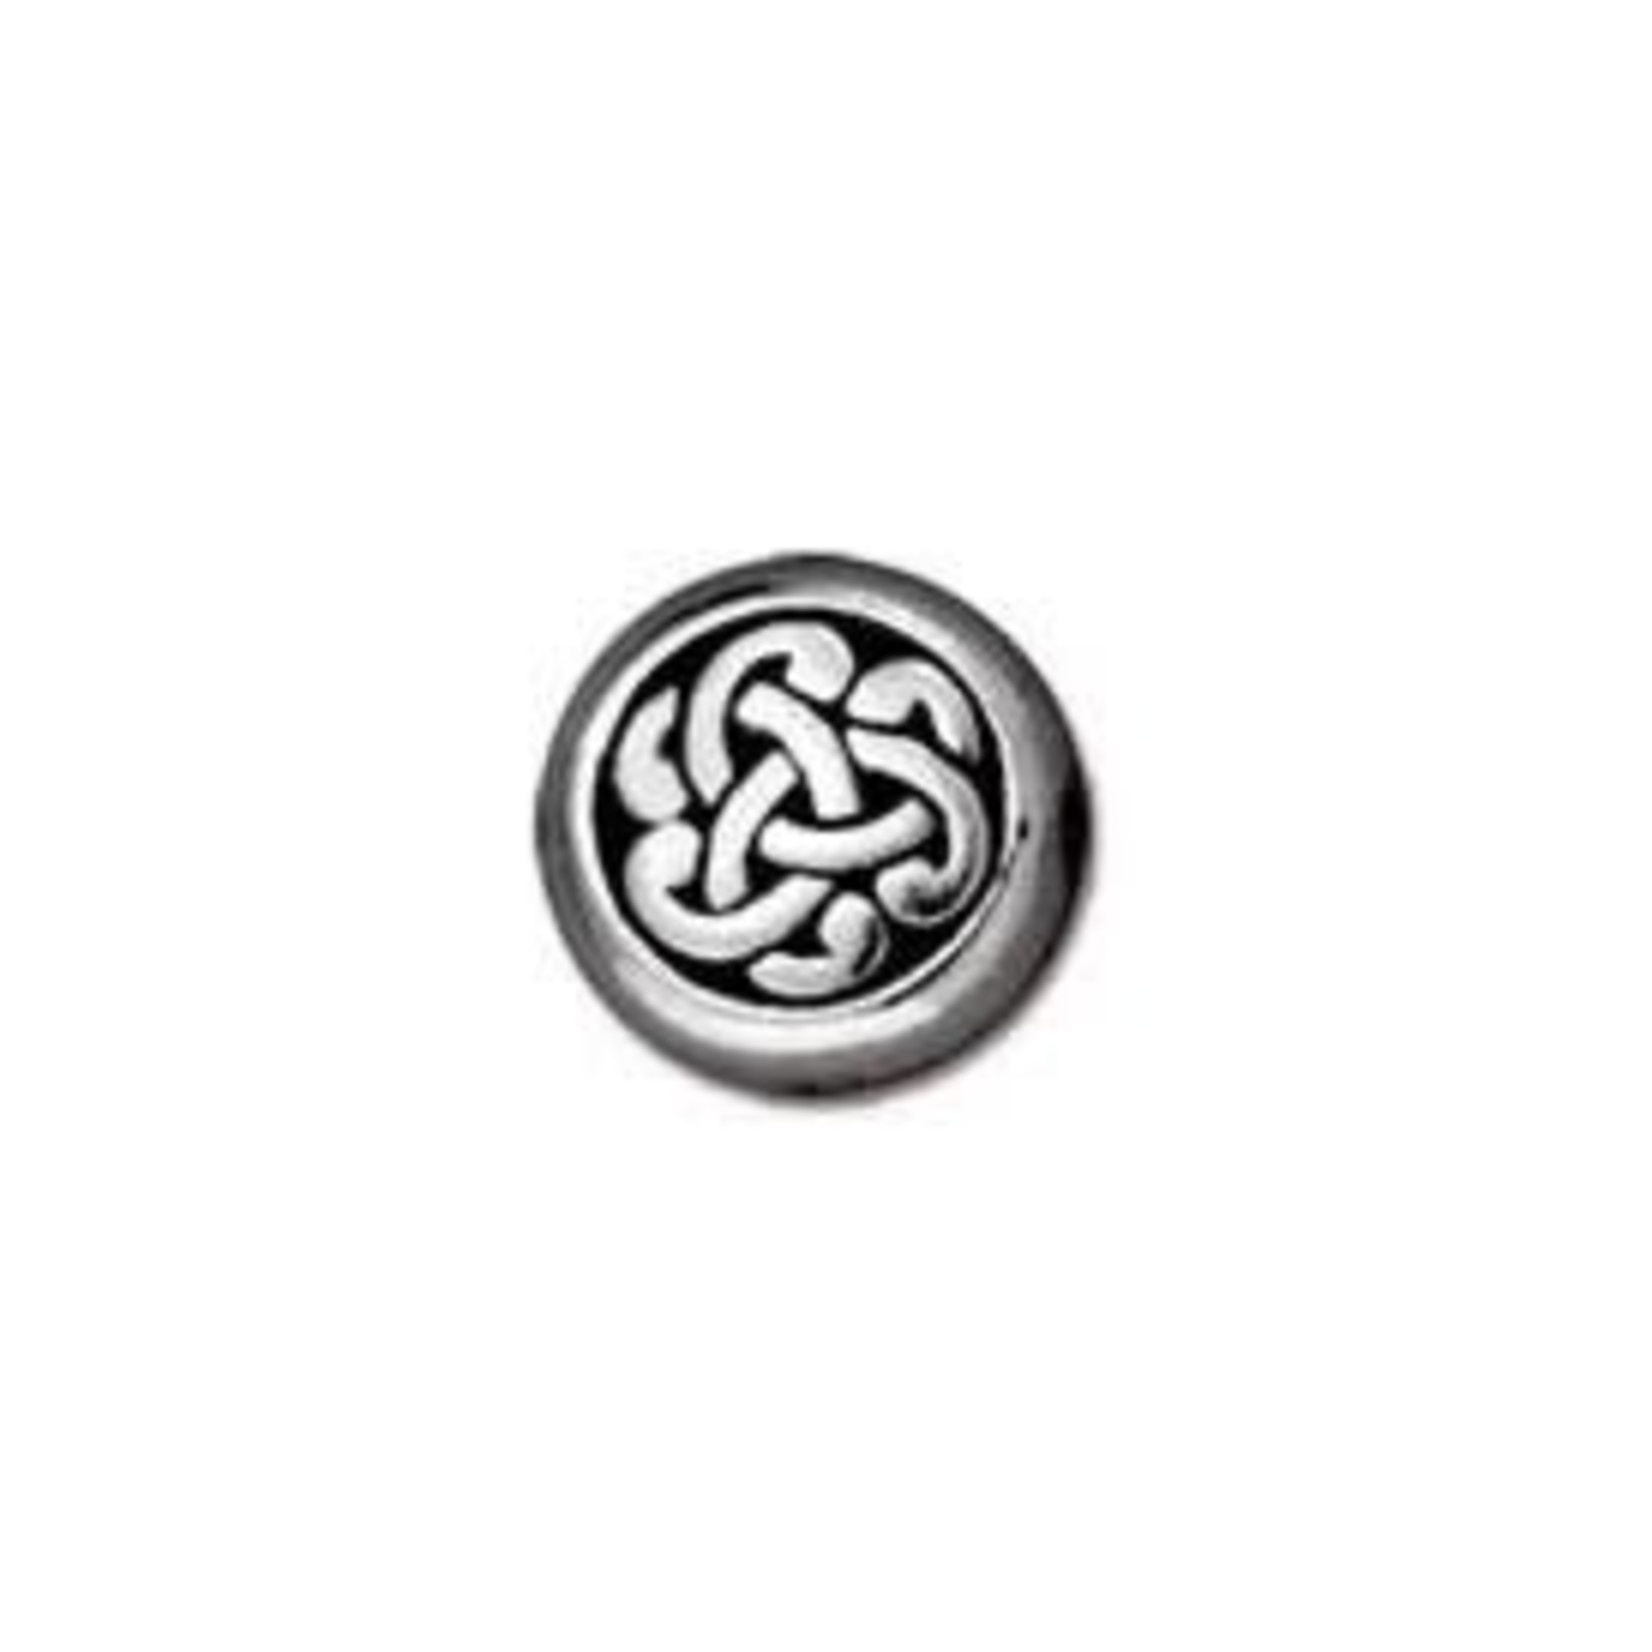 TierraCast Tierracast Antique Silver Plated Circle Triad Bead